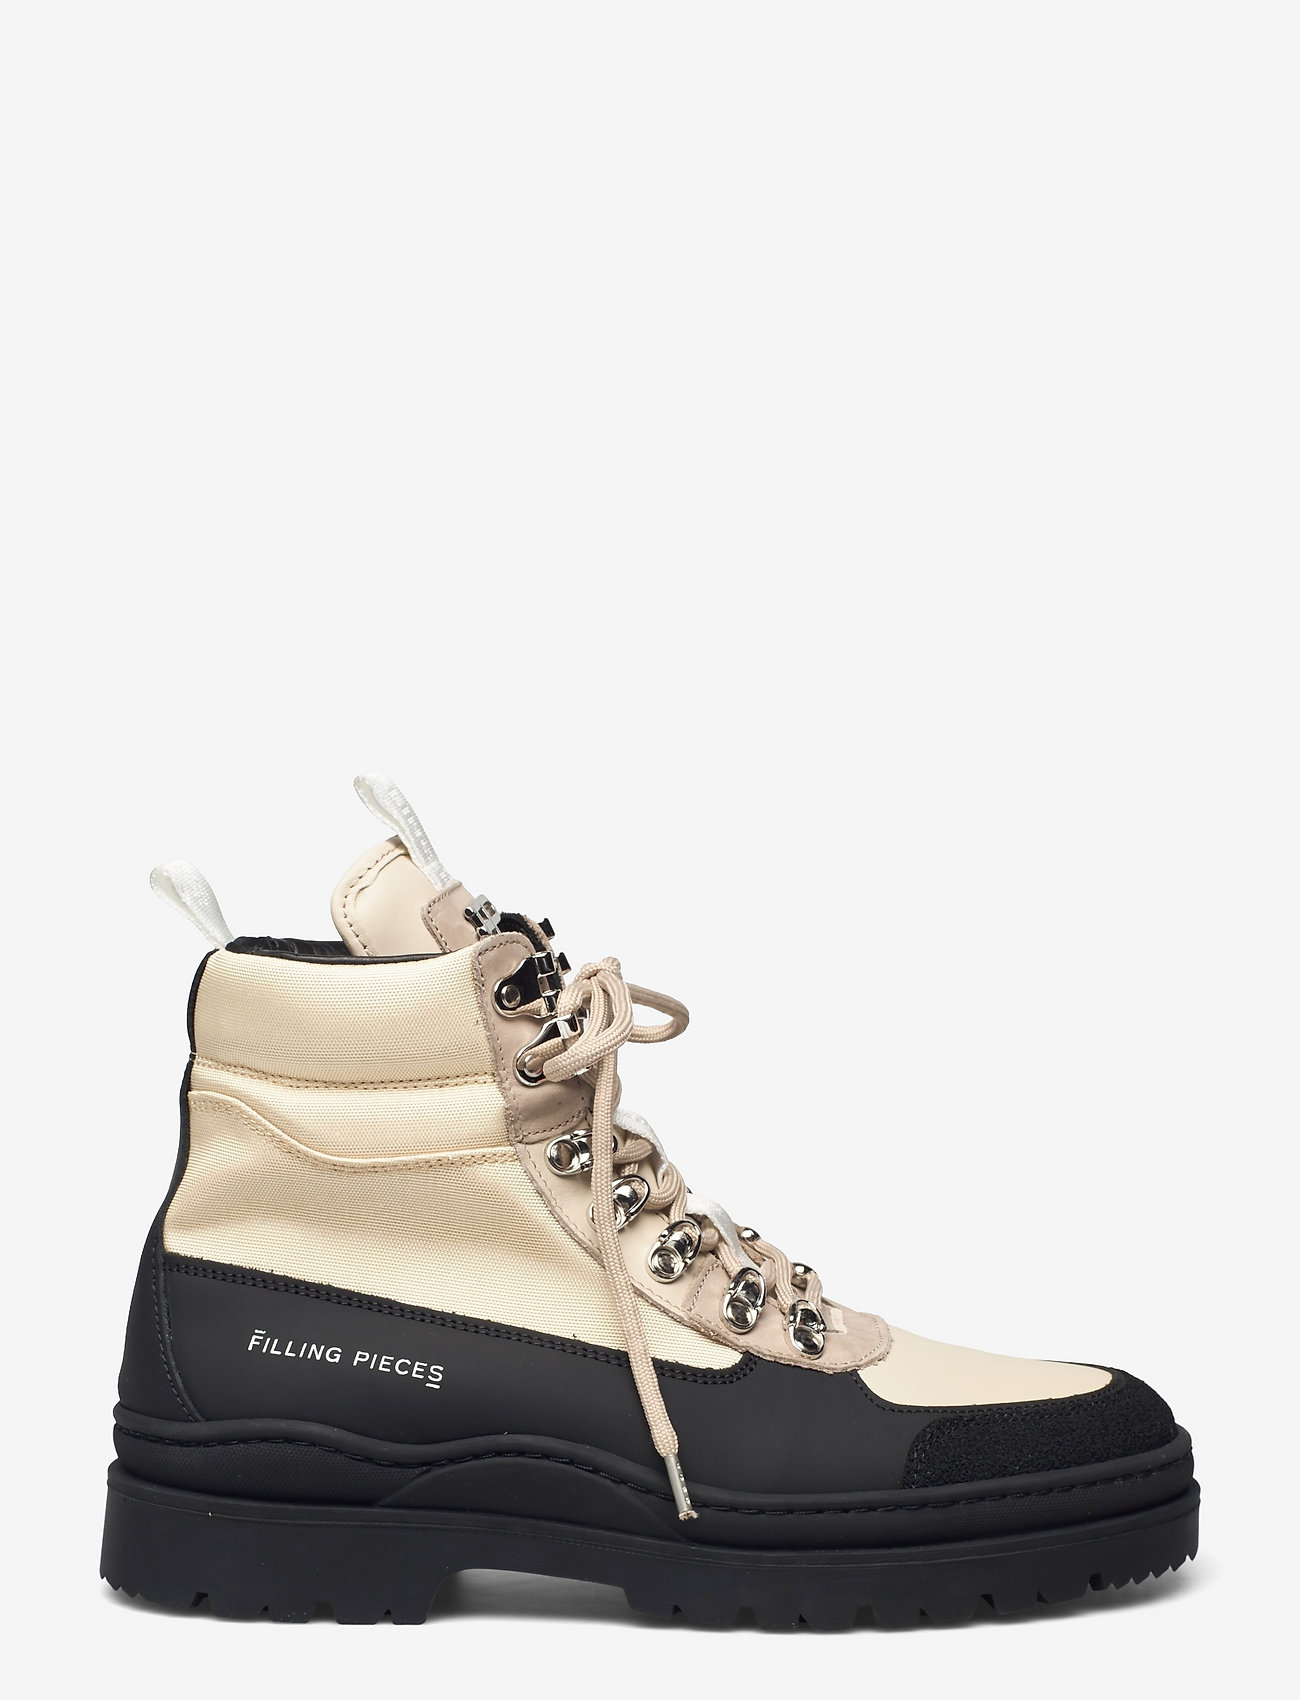 Filling Pieces - Mountain Boot Mix - black/beige - 1